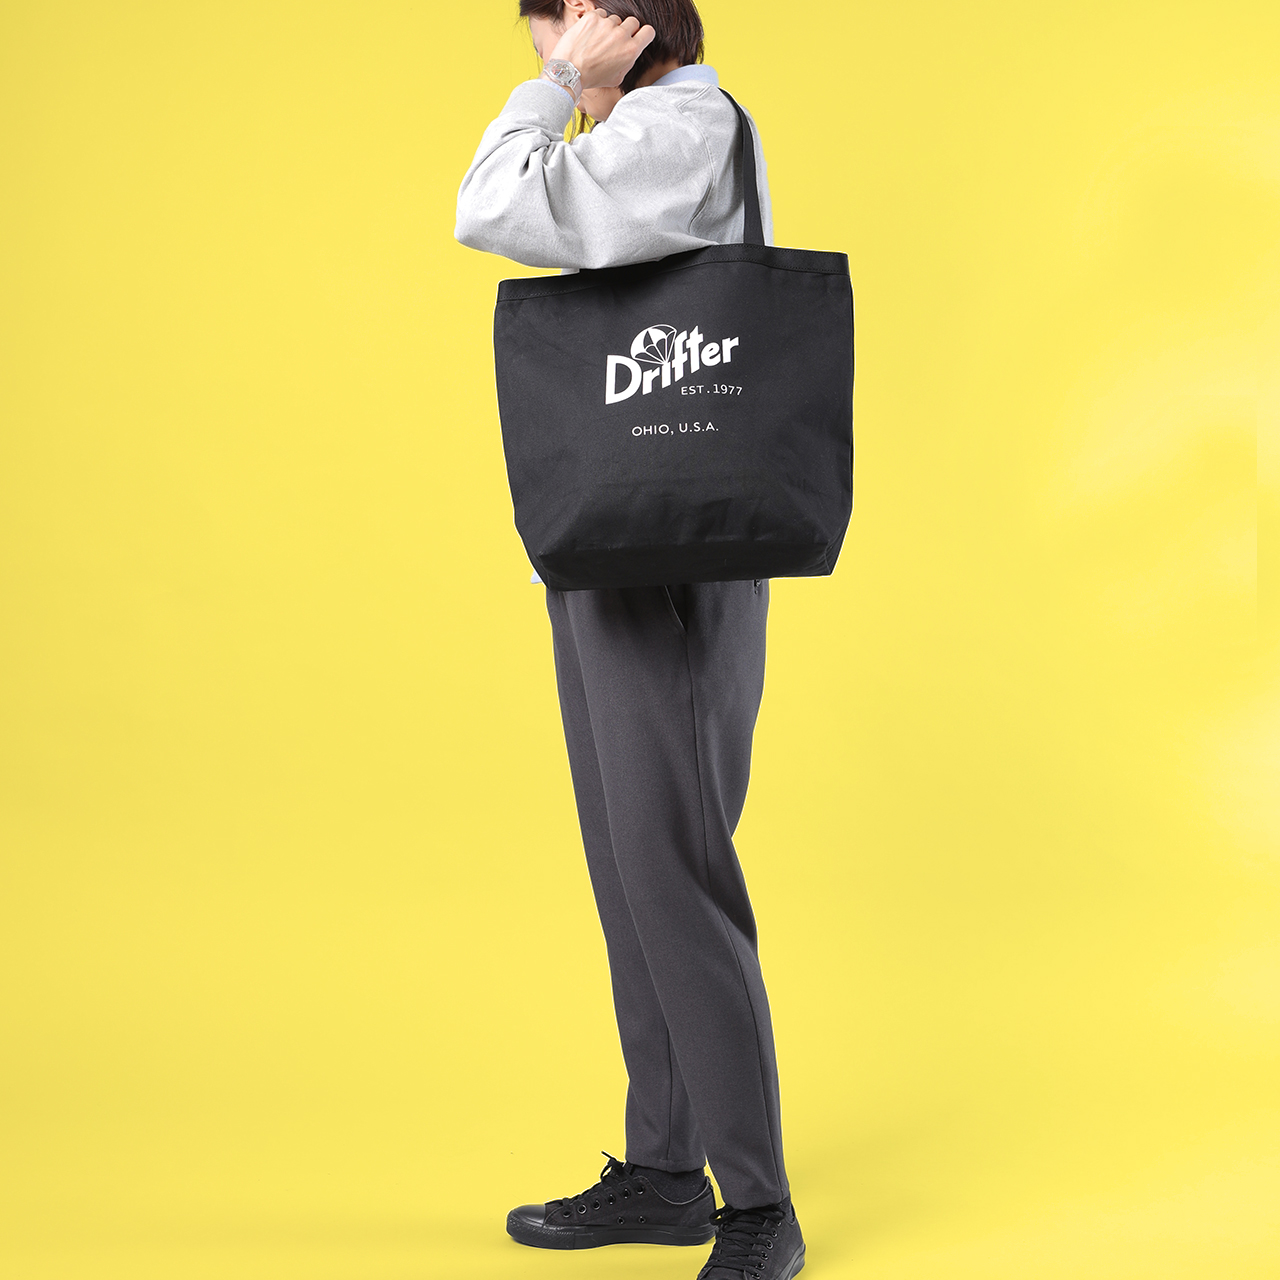 drifter-23ss-canvas-handle-tote